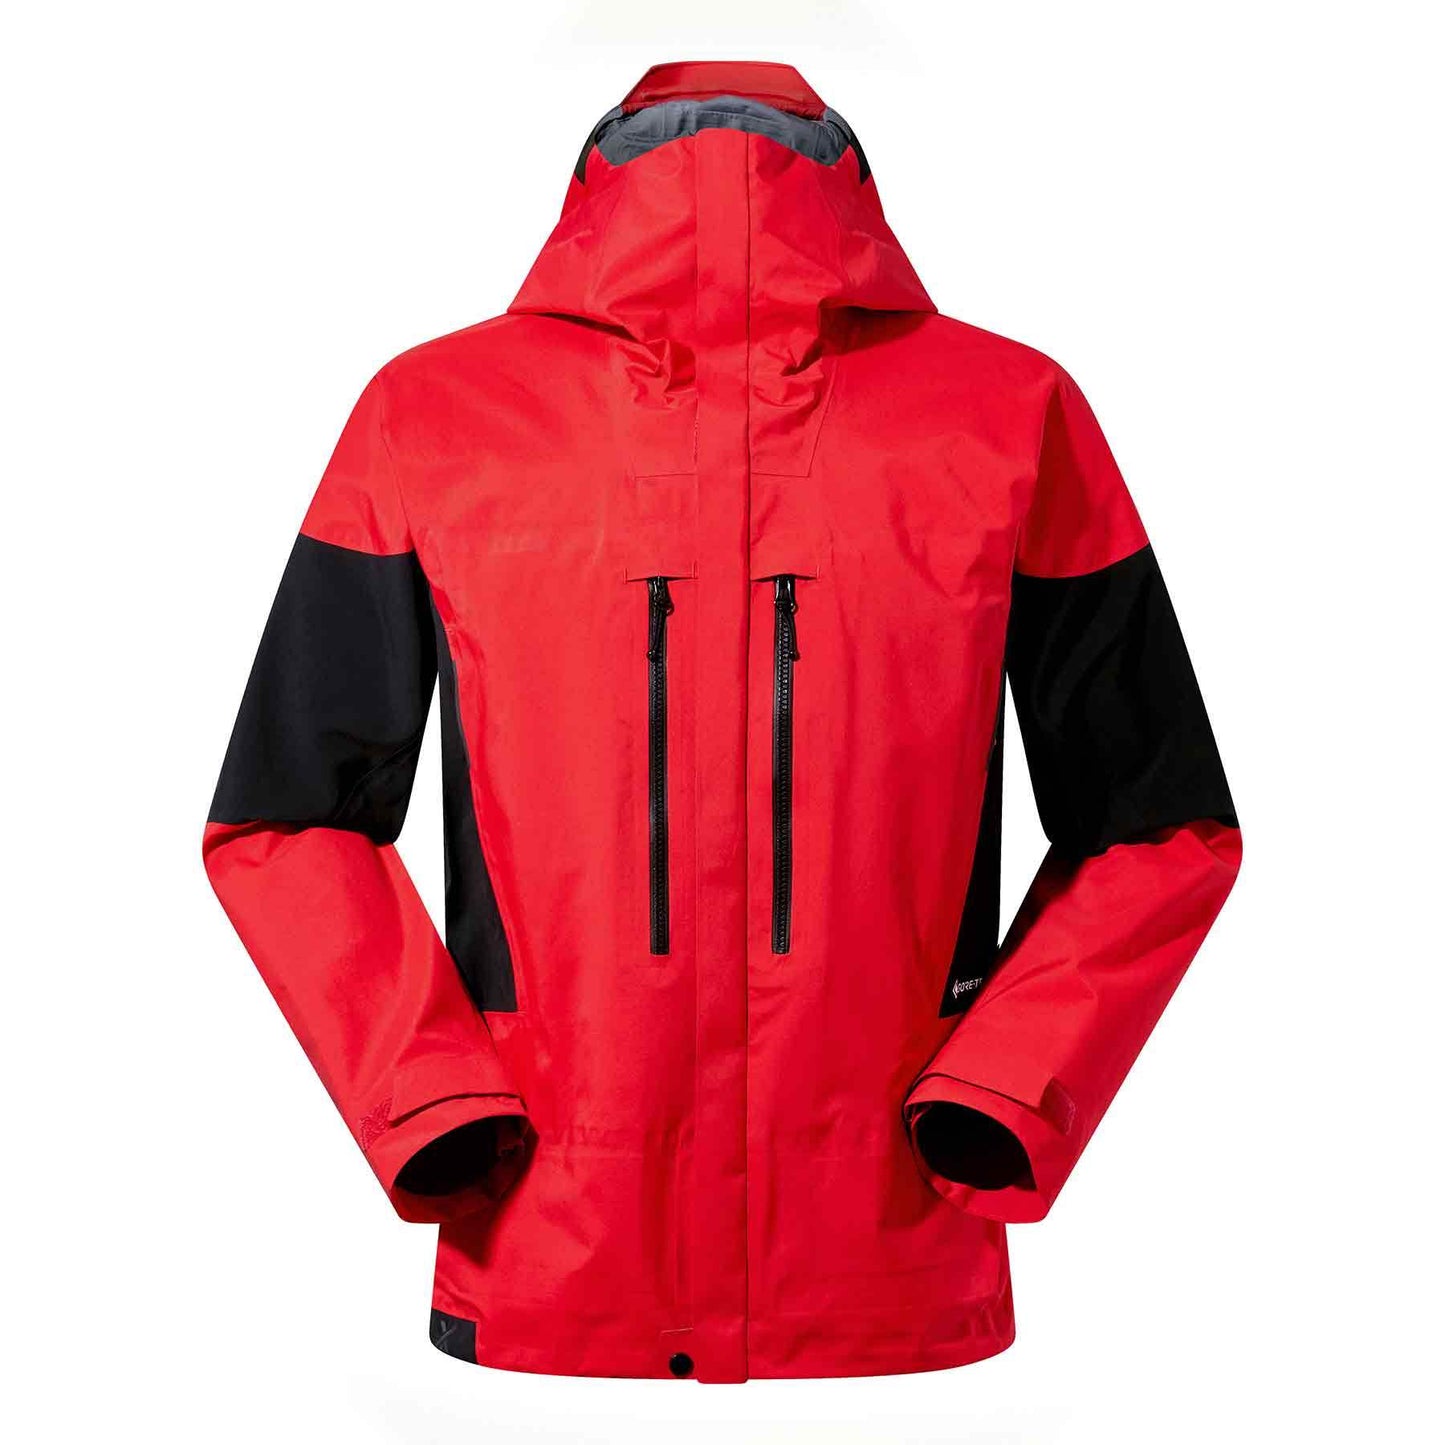 Berghaus Men’s Extrem MTN Guide GTX Pro Jacket - The Luxury Promotional Gifts Company Limited